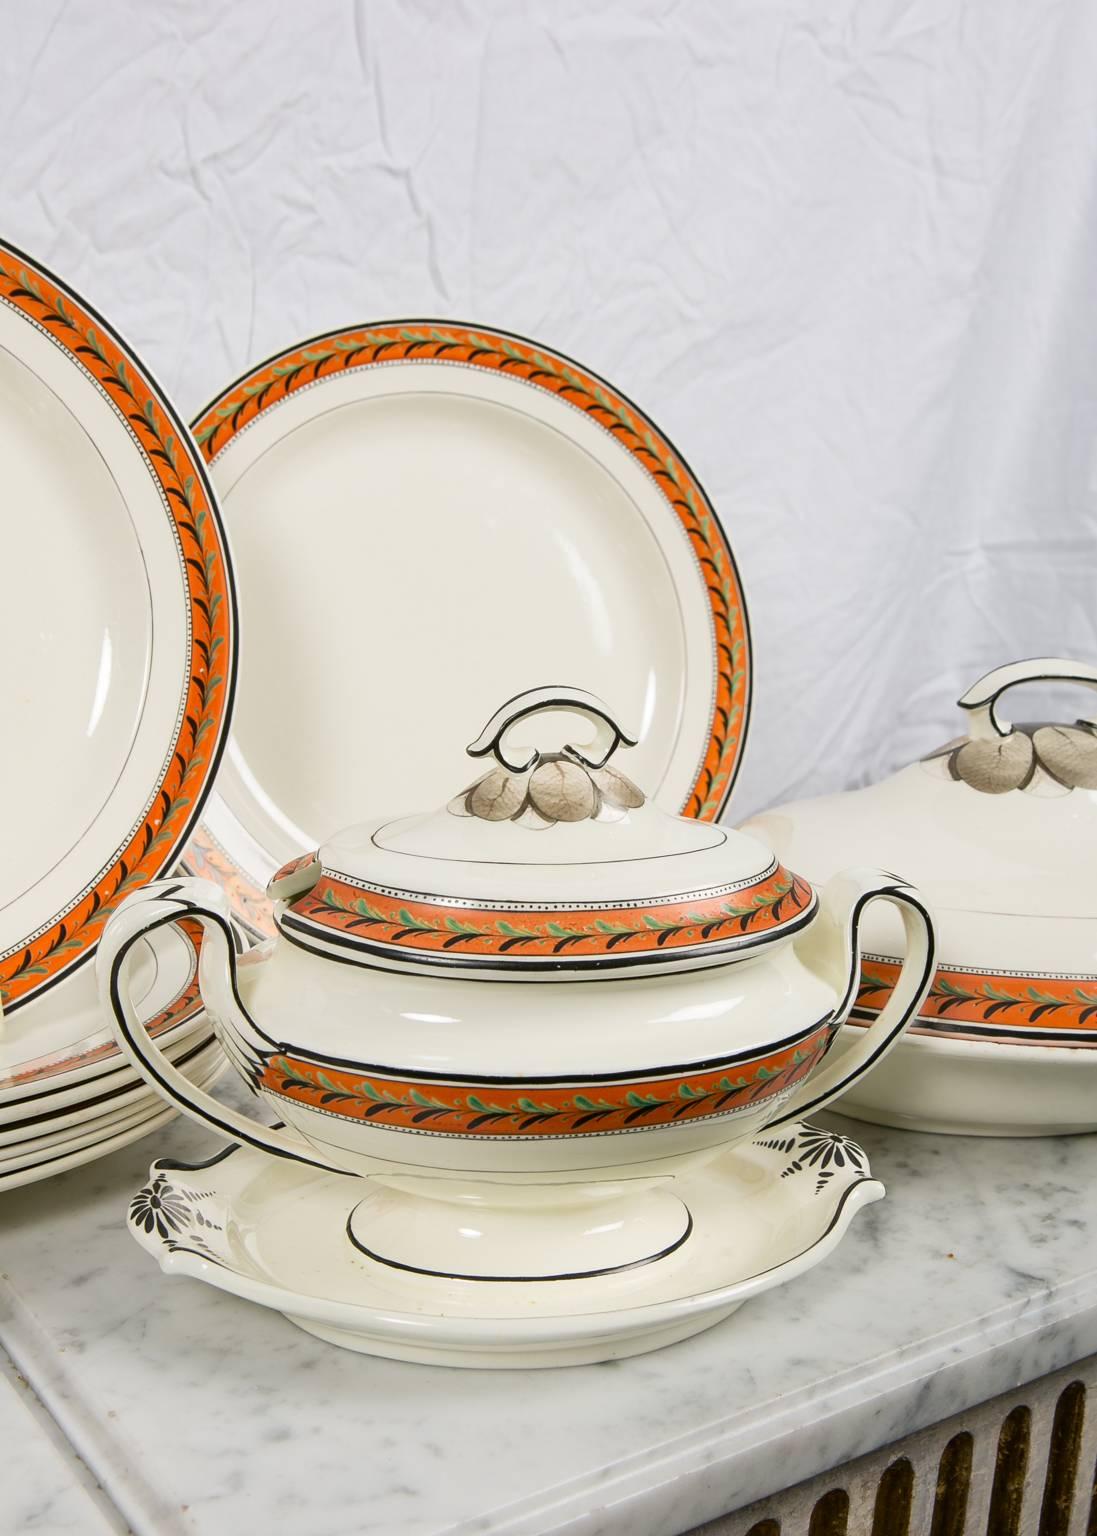 Hand-Painted Antique Creamware Set of Dishes with Orange Borders